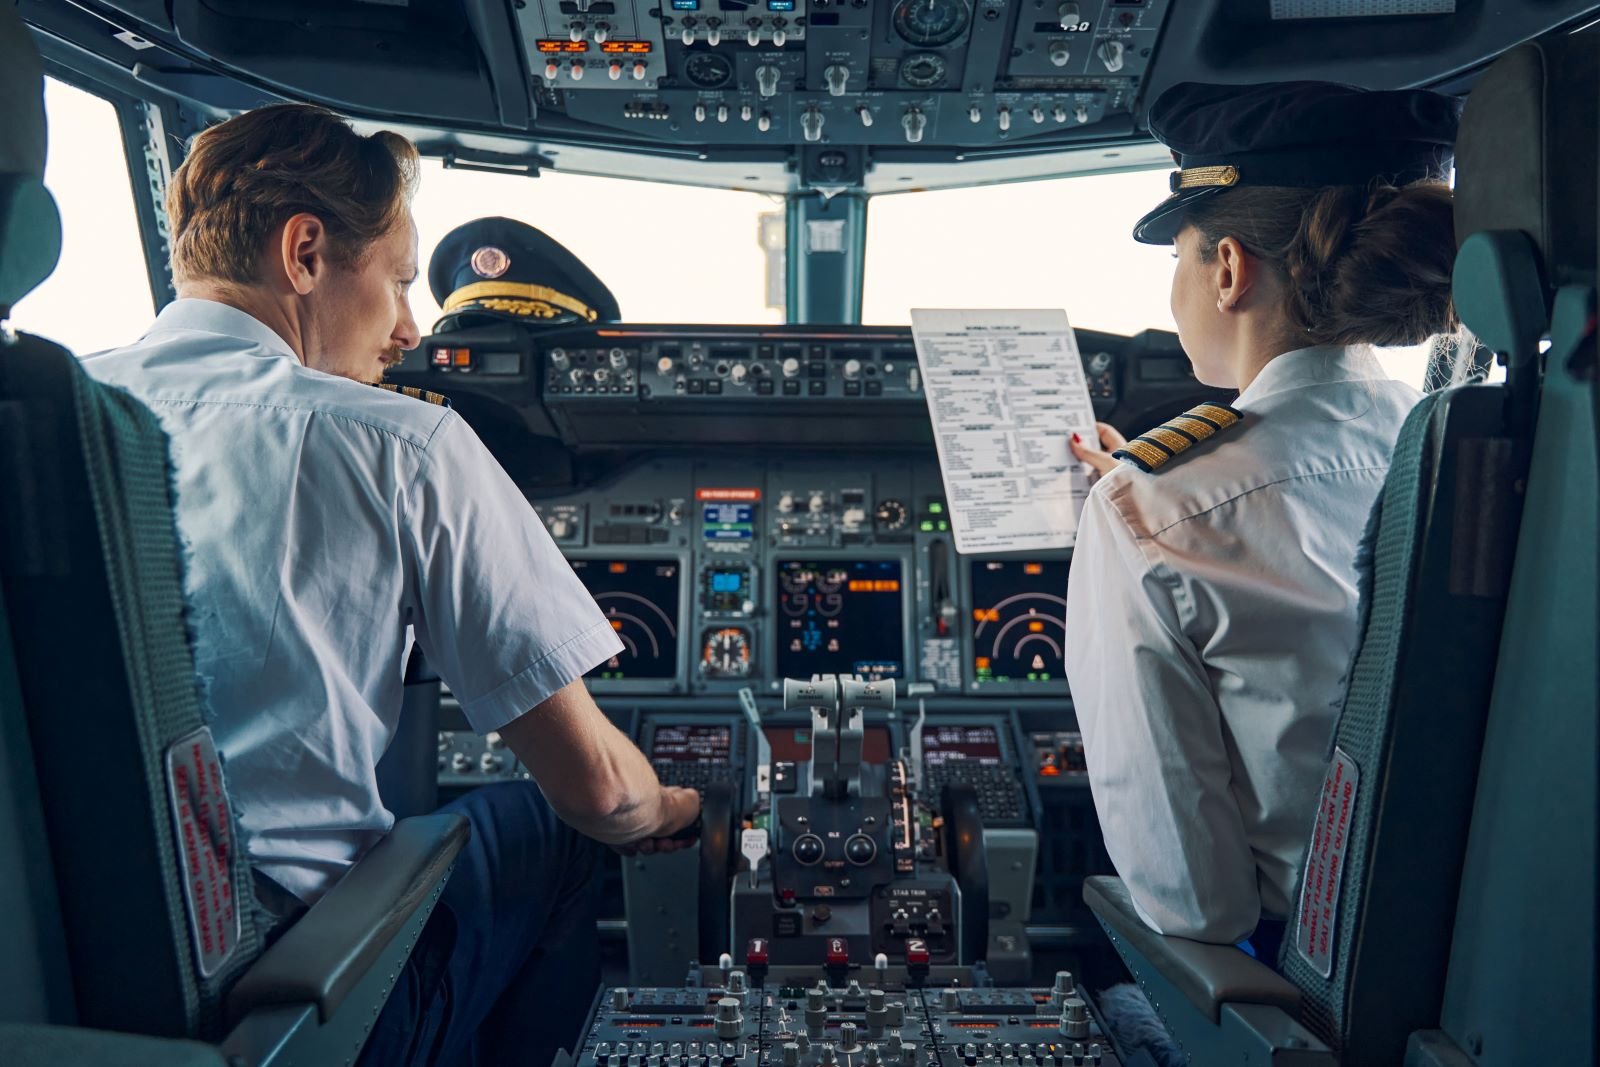 <p>To fly a commercial aircraft, you will need a bachelor’s degree, a private pilot license, and 1500 hours of flying experience. Once you do that, you can earn more than $200,000 per year, with the average salary being $198,190.</p>